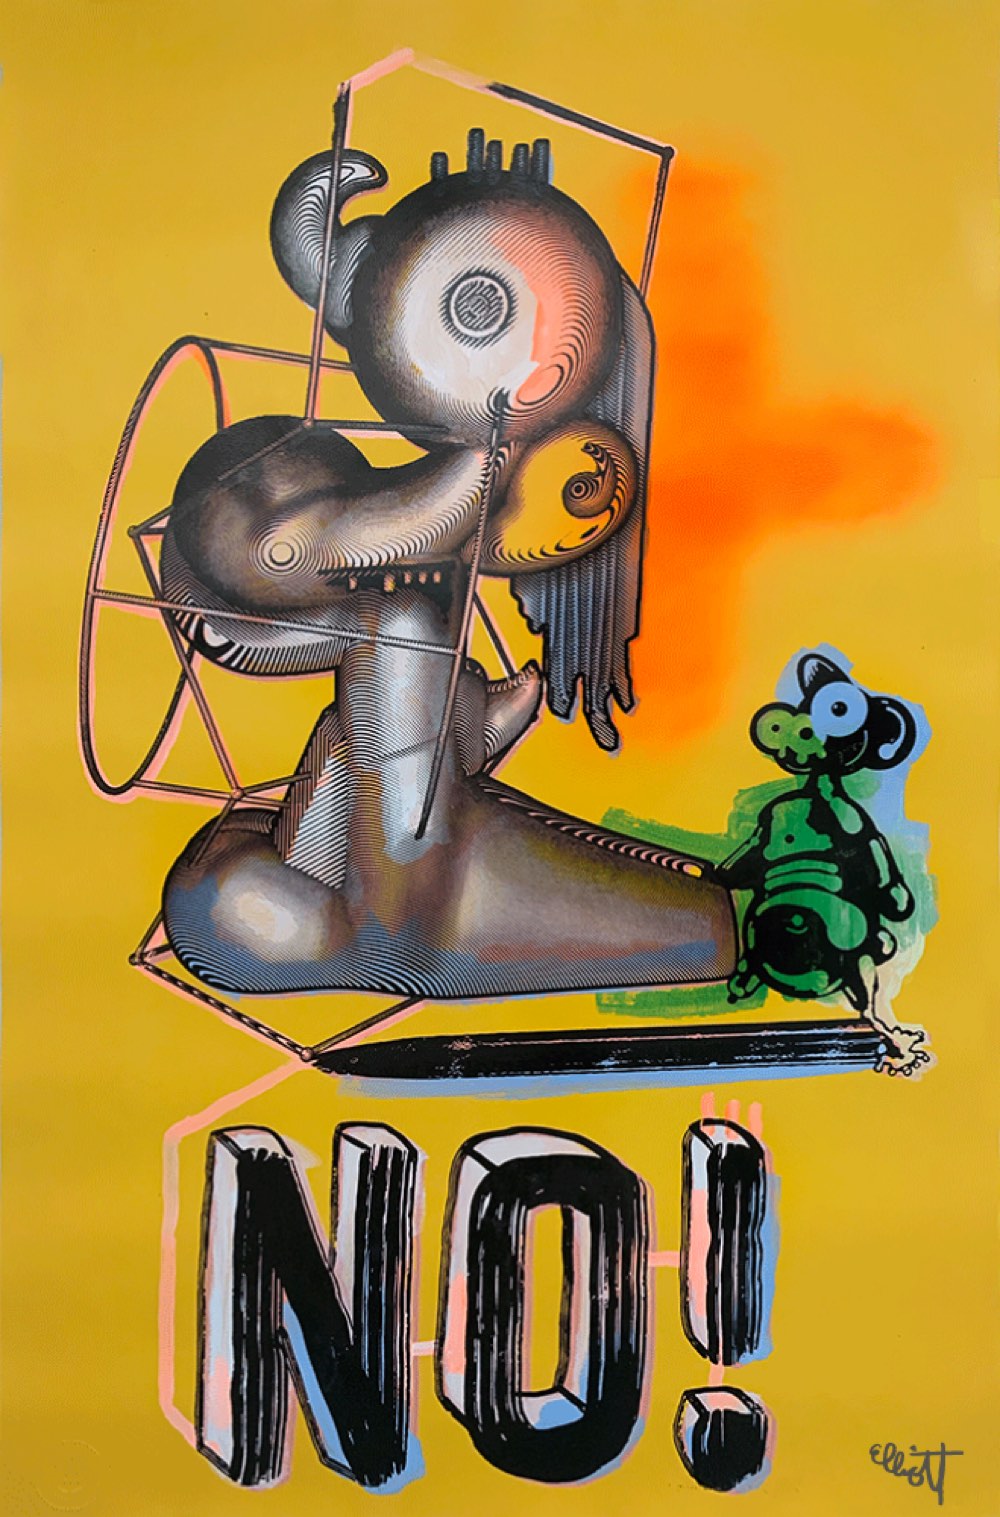 “No!” Hand-Painted Limited Edition Print by Elliott Earls for July 2019 (Number 6 of 6)